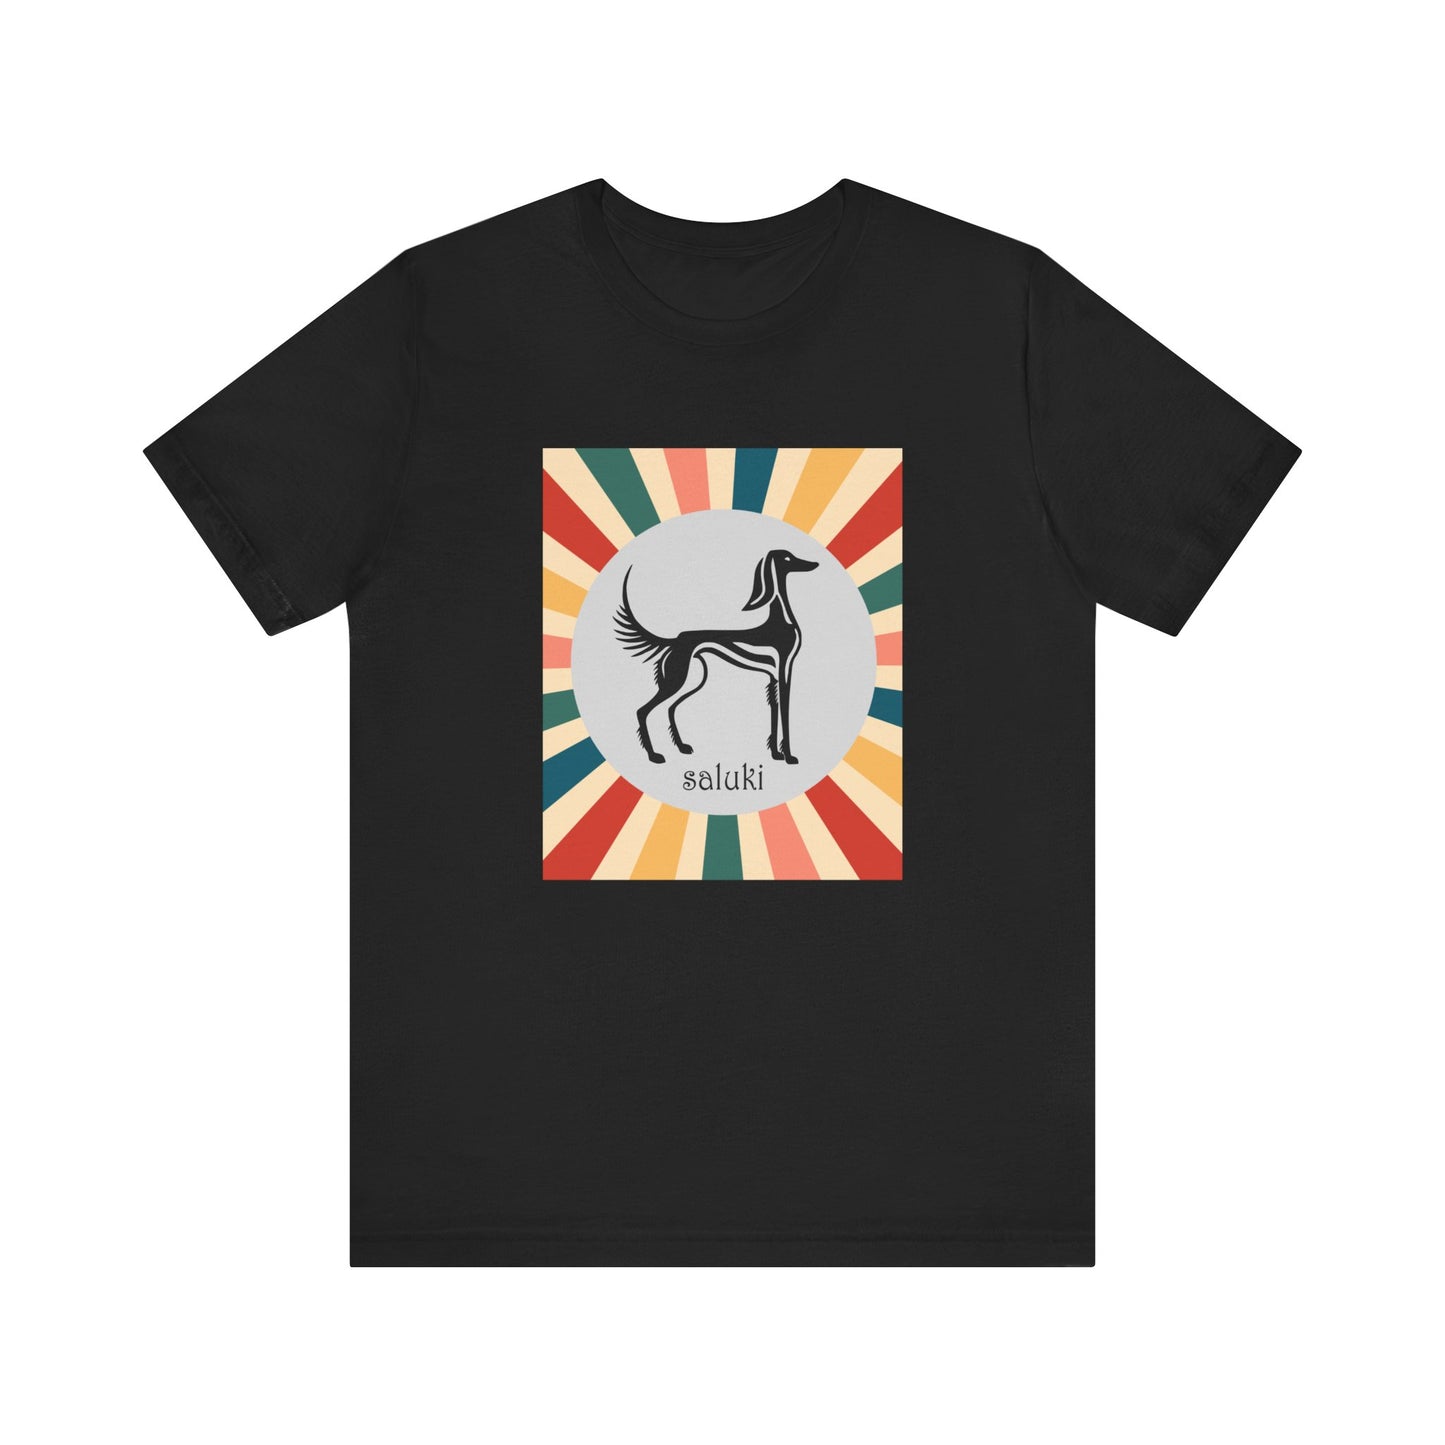 Unisex Jersey Short Sleeve Tee featuring a stylised graphic of a Saluki standing, looking onto the distance, with a color background. (Art 2)